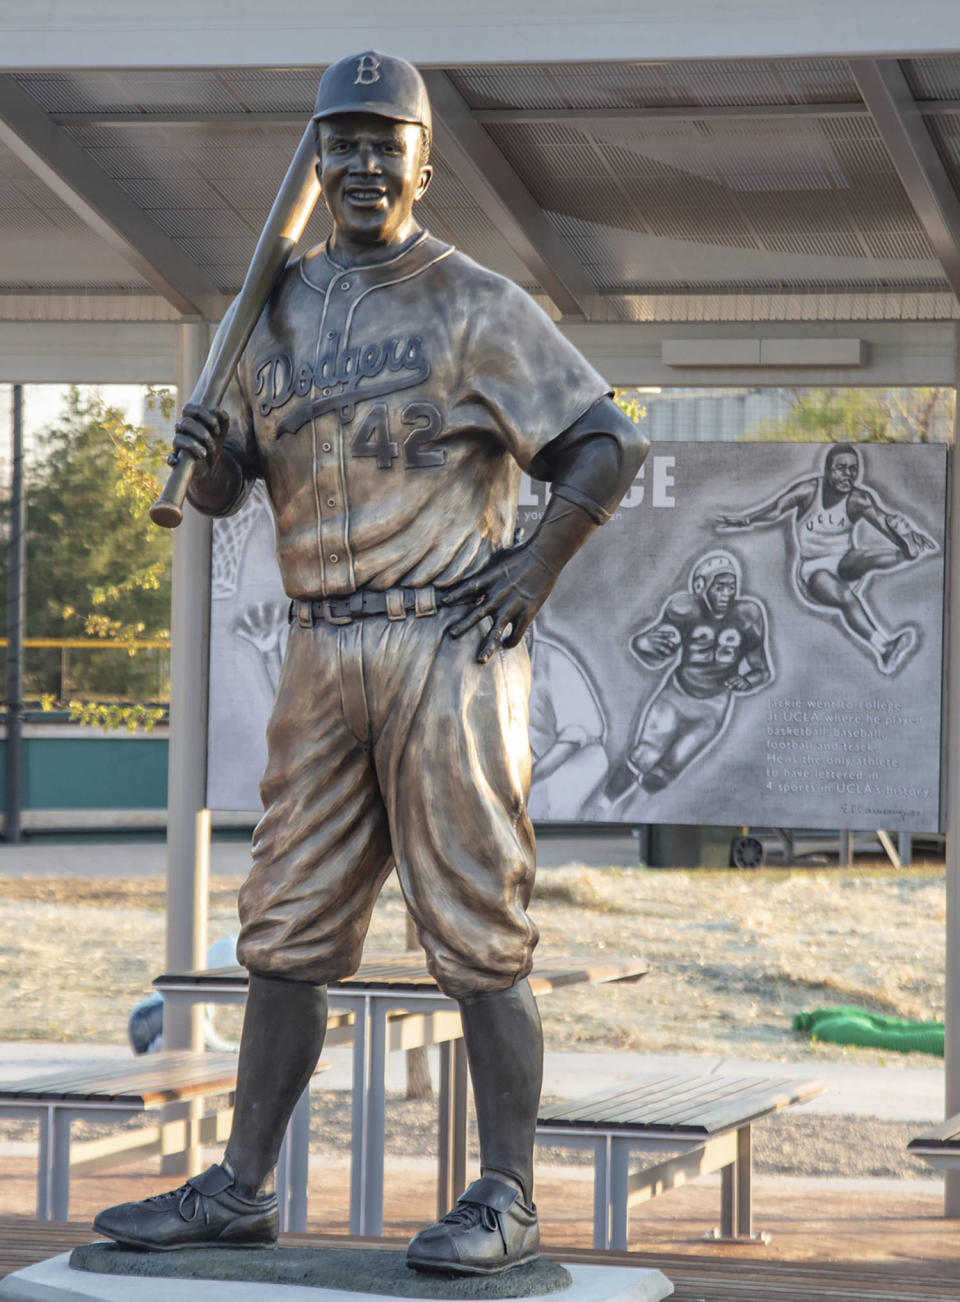 The statue of Jackie Robinson in Wichita, Kan., before it was cut down. (Mel Gregory / AP file)